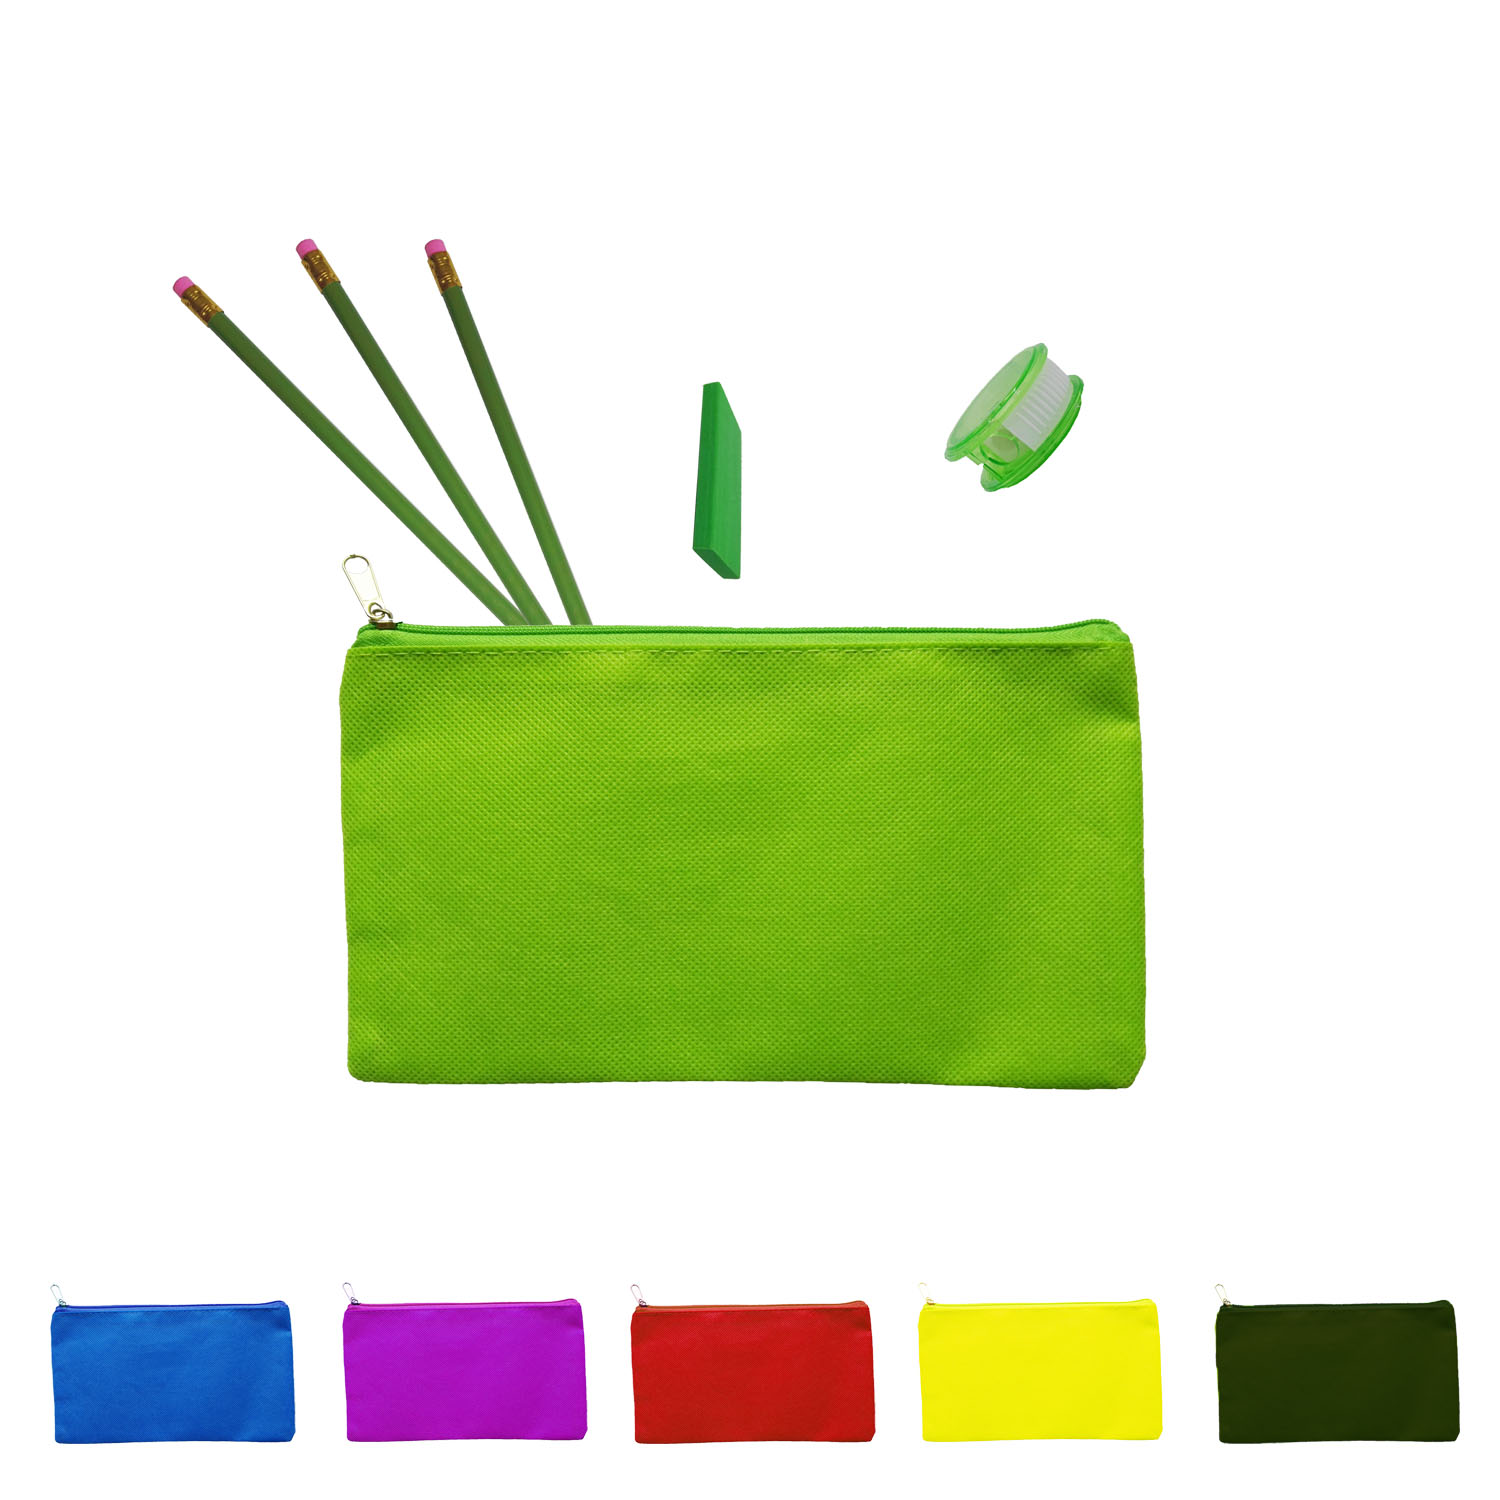 GL-AAA1120 8.5inx5in Non-Woven Pencil Pouch Zipper Closed